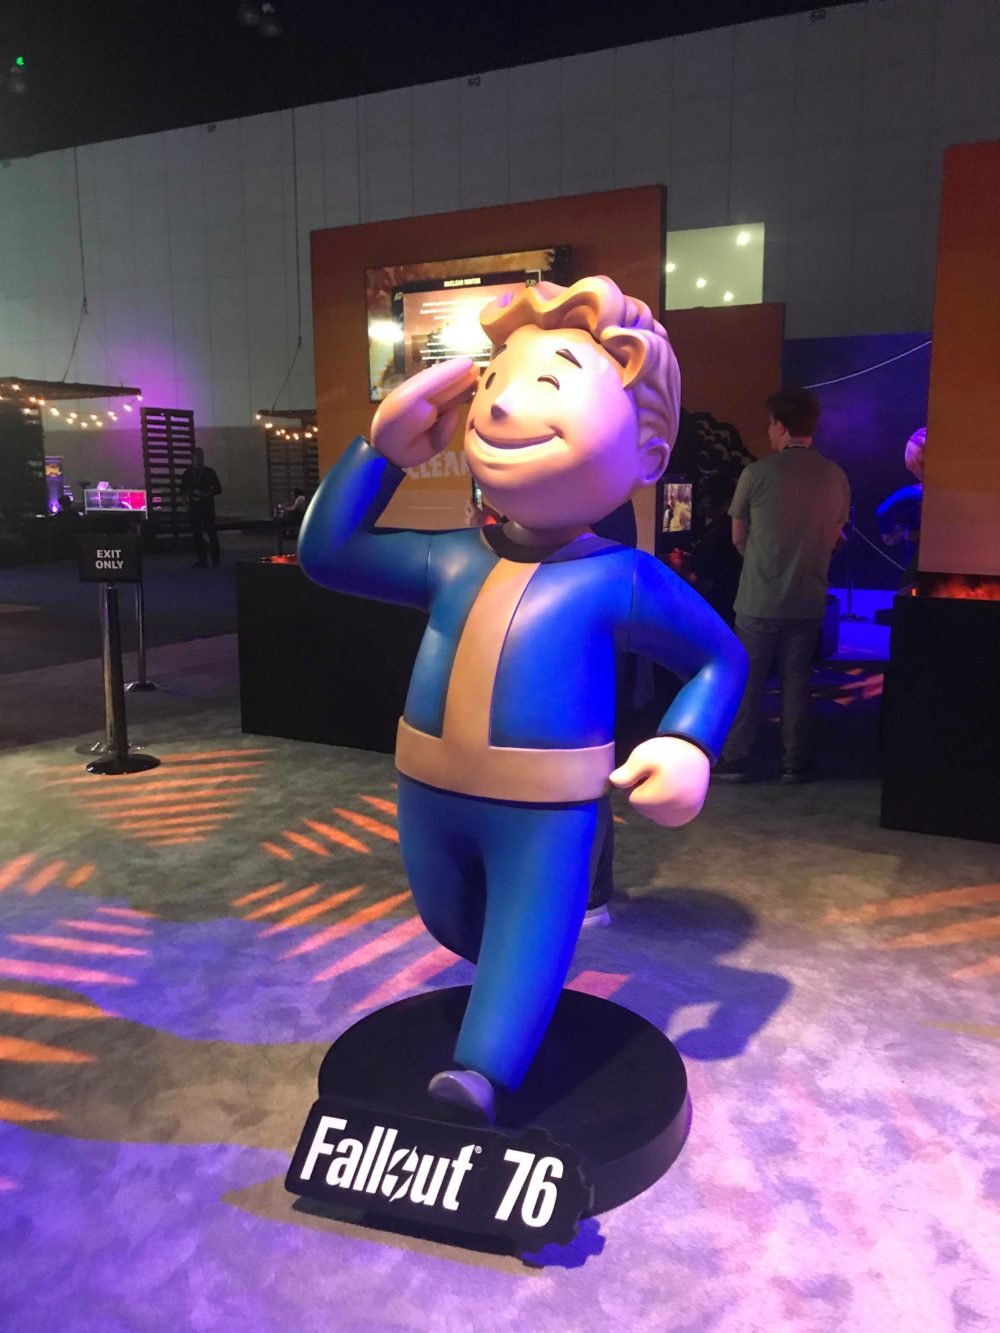 the fallout 76 man